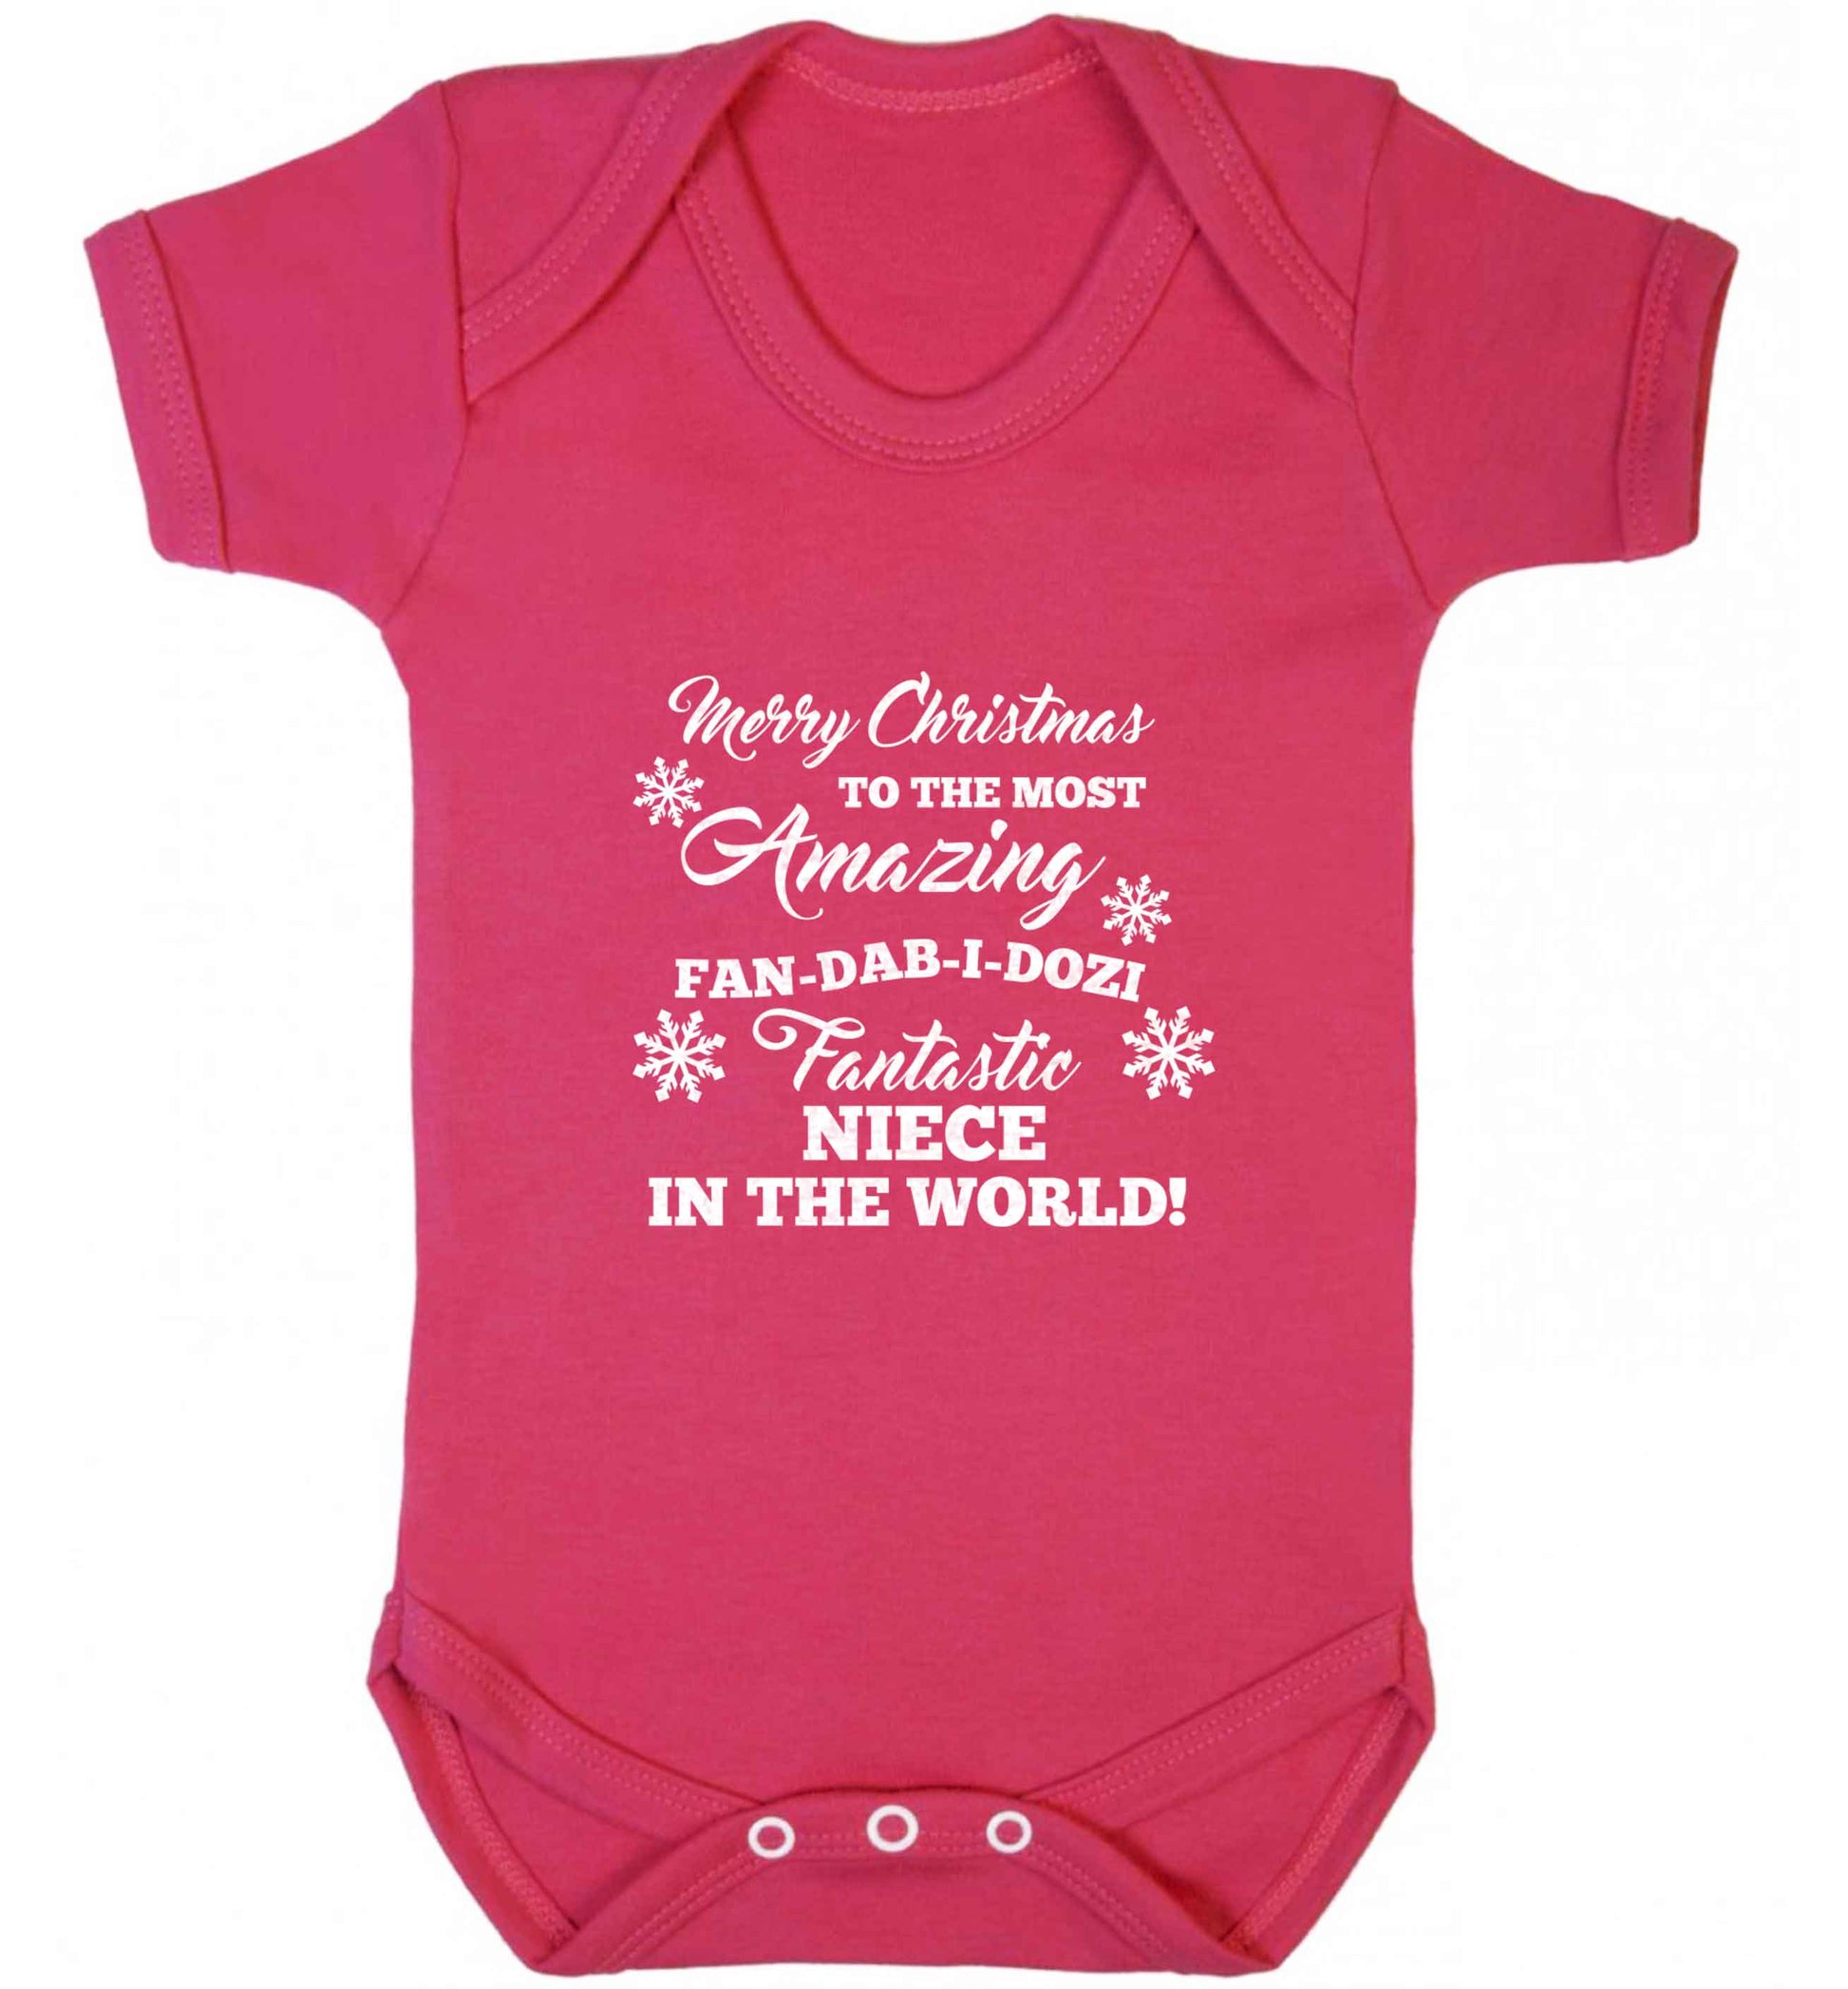 Merry Christmas to the most amazing fan-dab-i-dozi fantasic Niece in the world baby vest dark pink 18-24 months